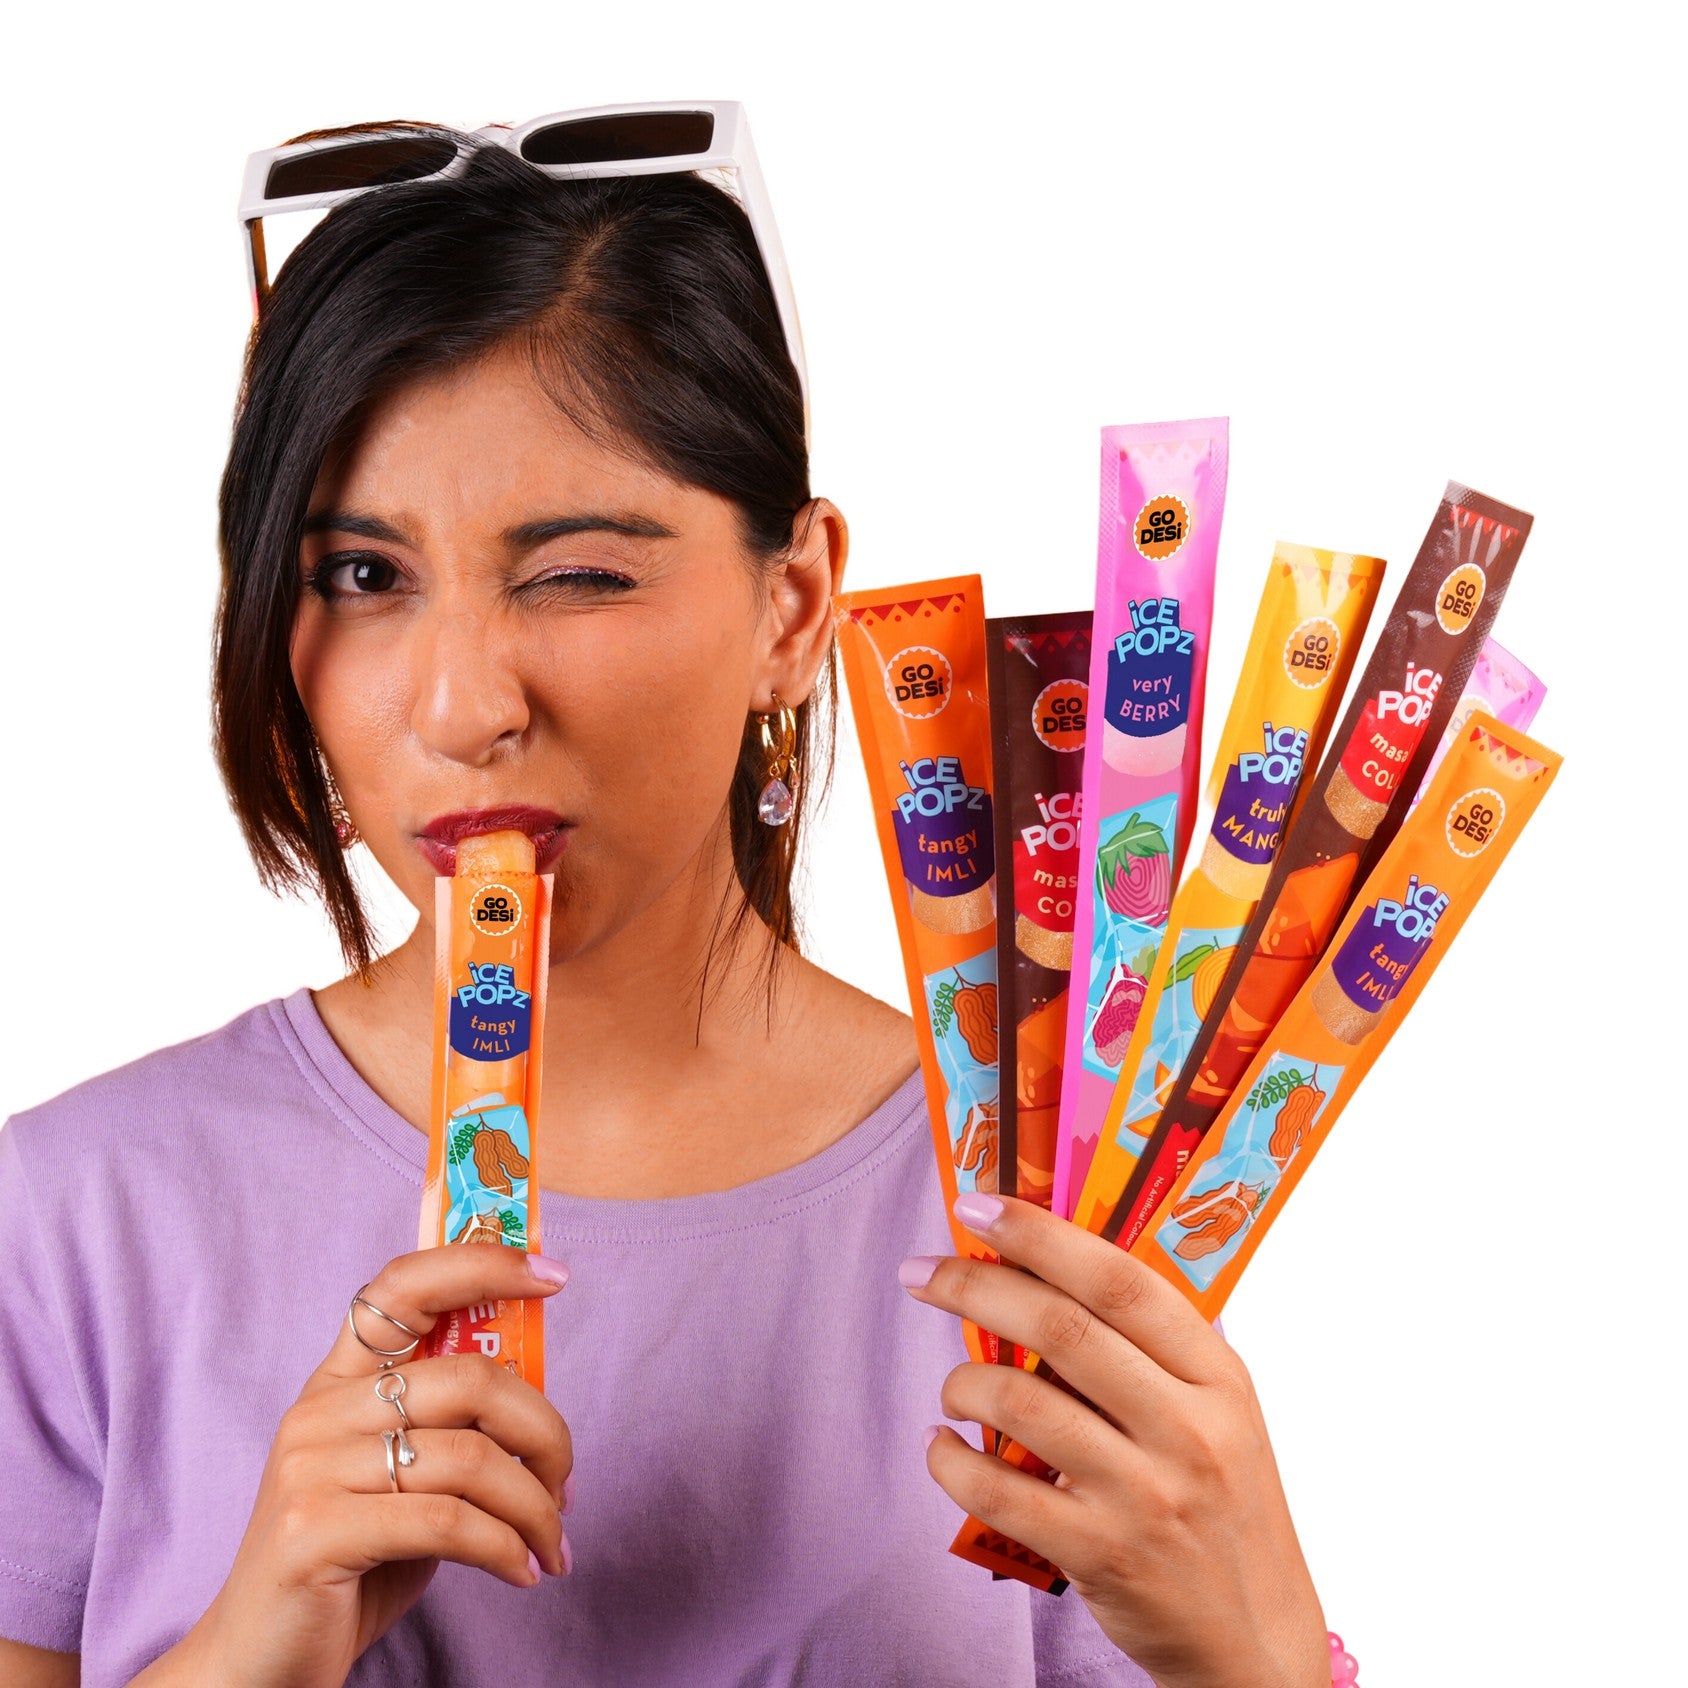 ICE Popz |12-Pack Assorted | 4 Flavours Fruit Ice Popsicles | Ice Pops (70ml Each) - Masala Cola, Truly Mango, Very Berry, Tangy Imli